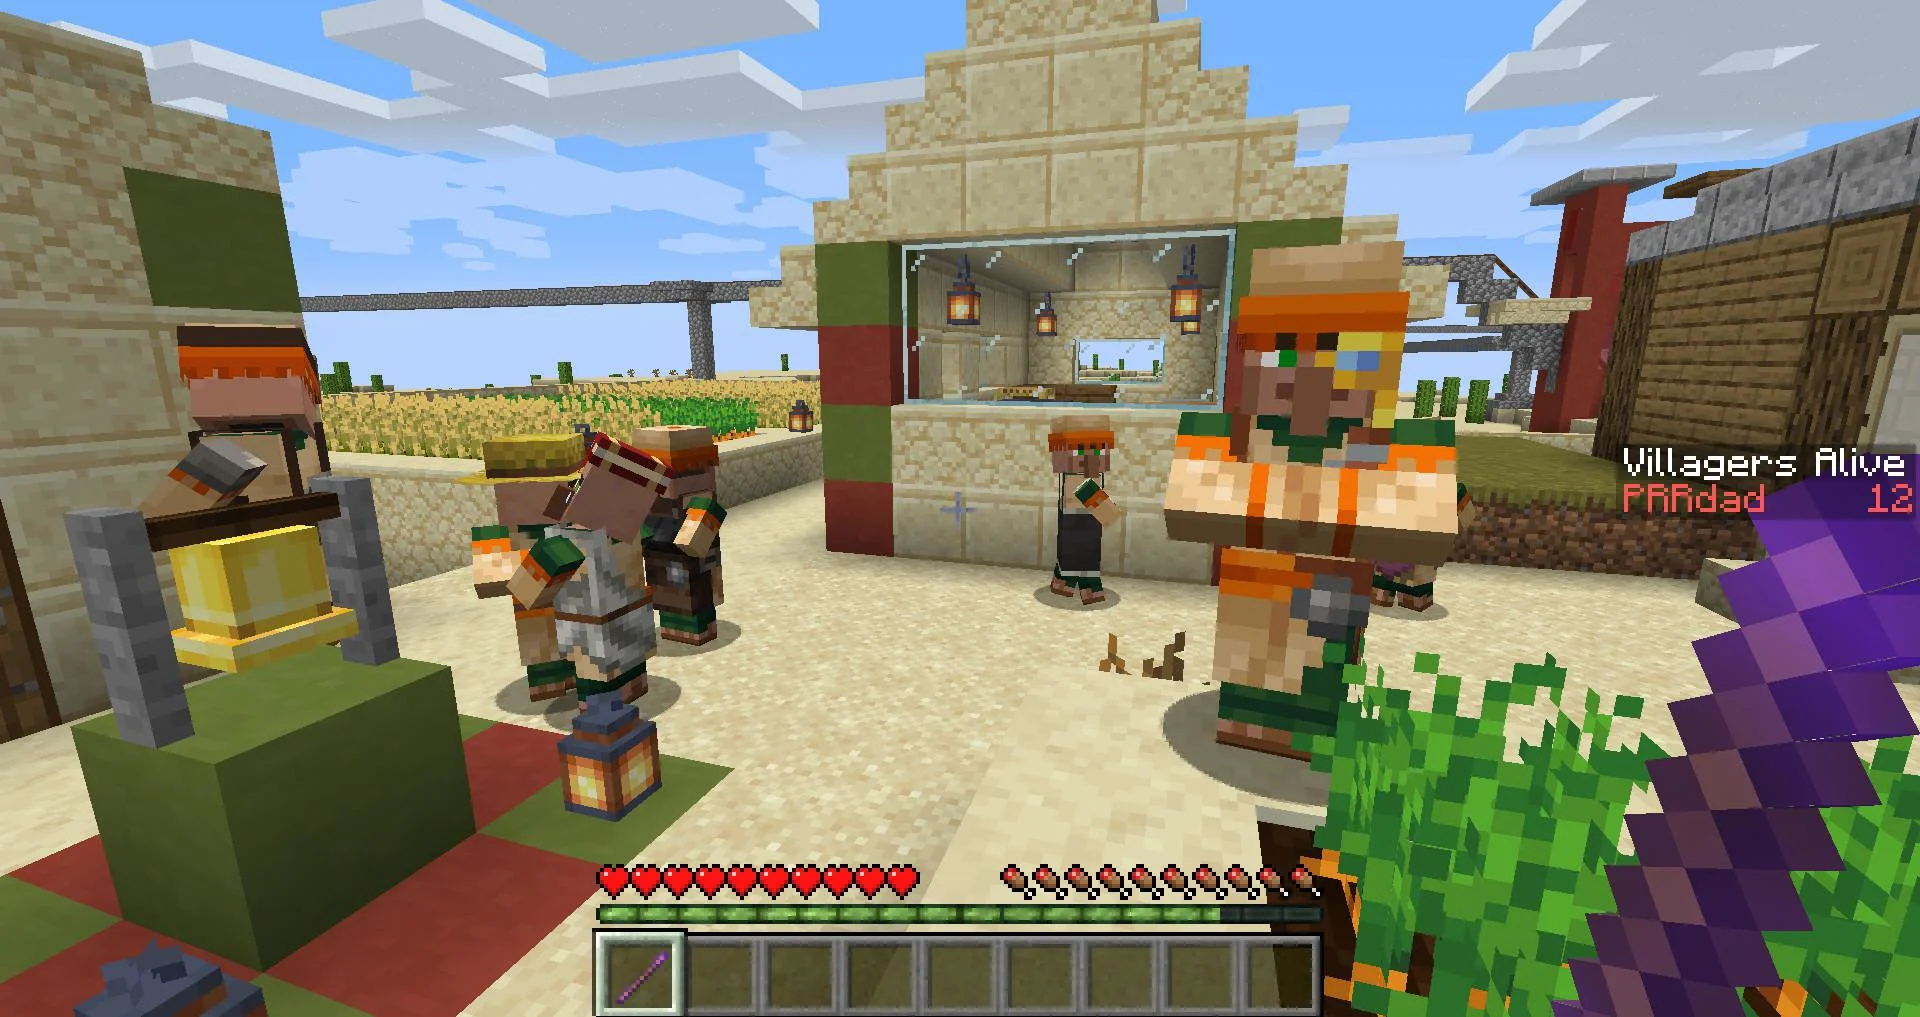 to breed villagers Minecraft | Digital Trends